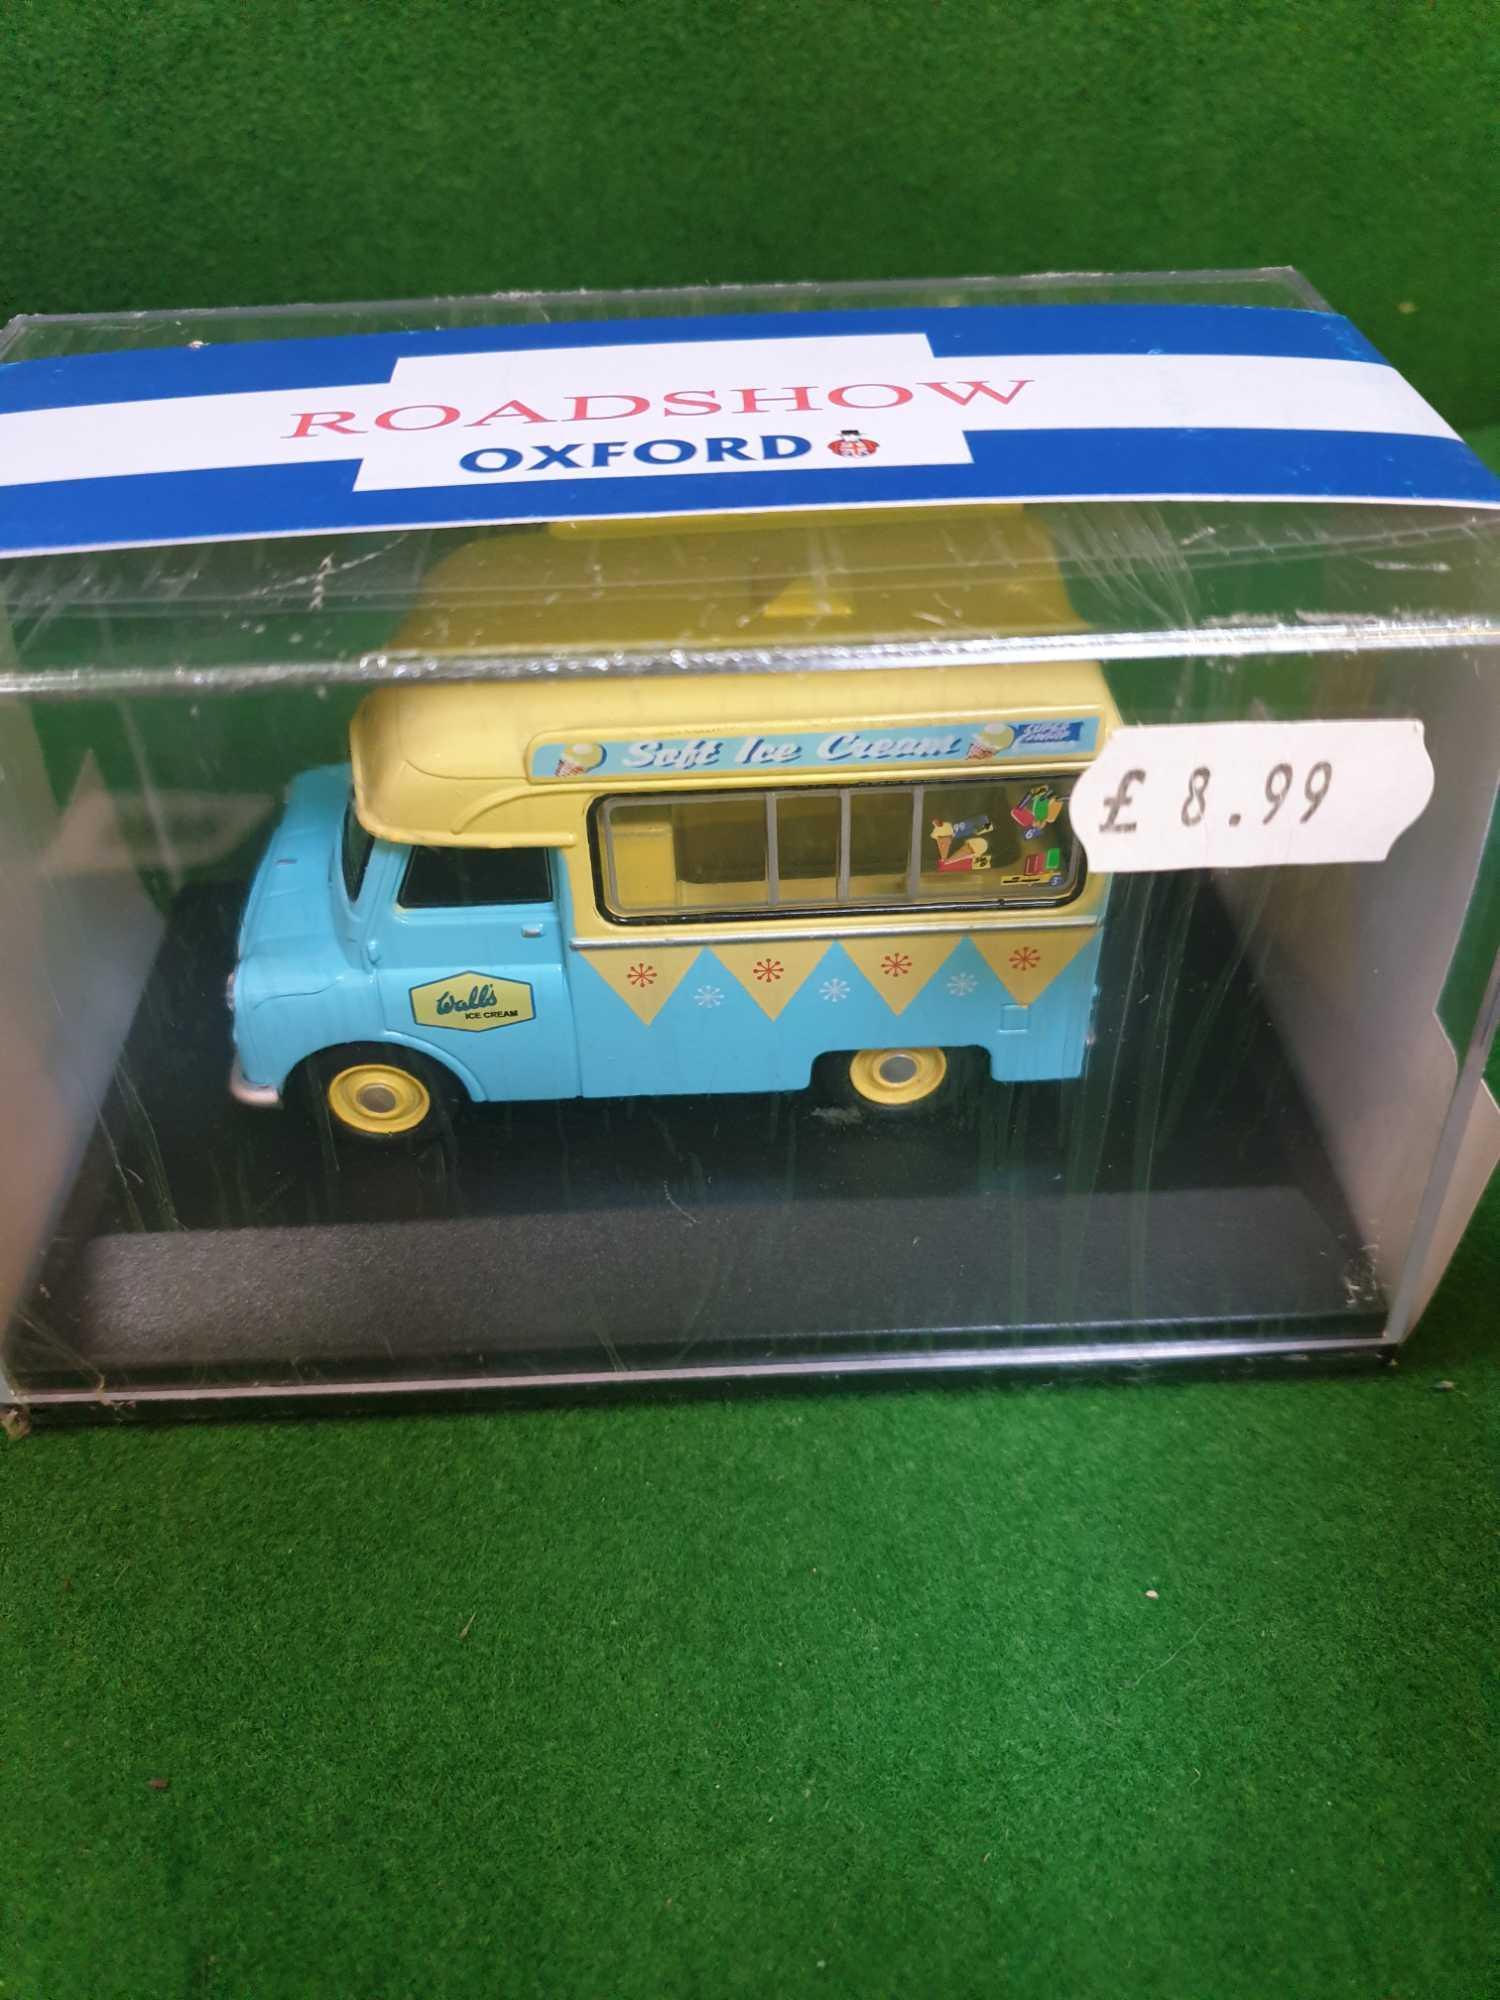 5x Oxford Road Show Diecast Models Comprising of #HA003 Oxford Diecast Walls Ice Cream - #CA002 - Image 3 of 5